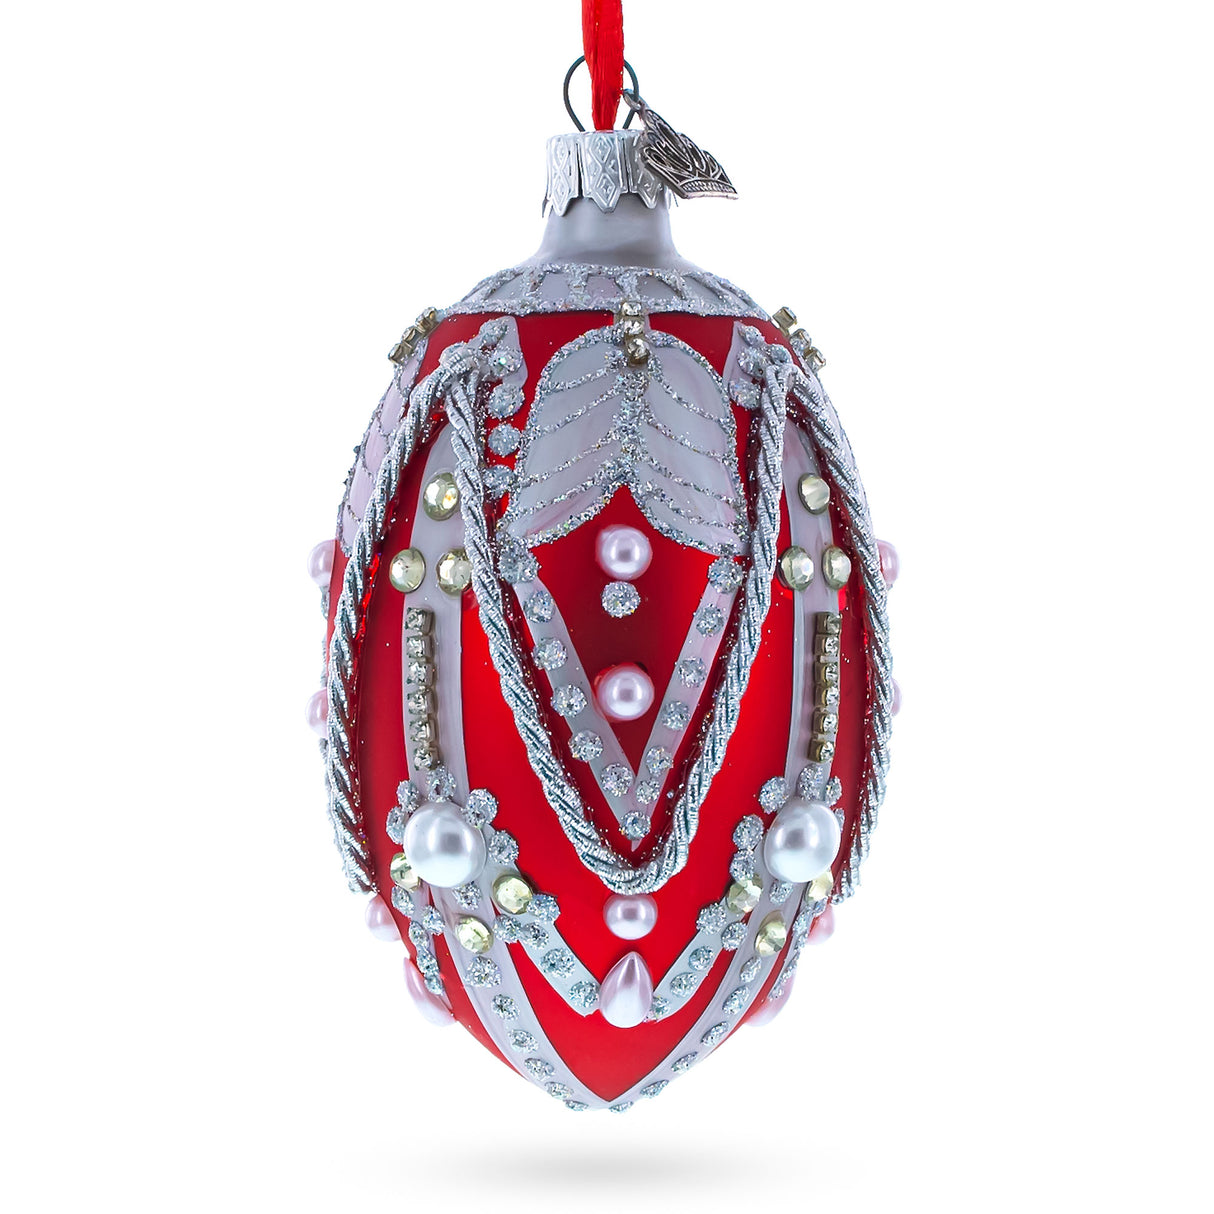 Glass Silver Ropes on Red Glass Egg Christmas Ornament 4 Inches in Red color Oval